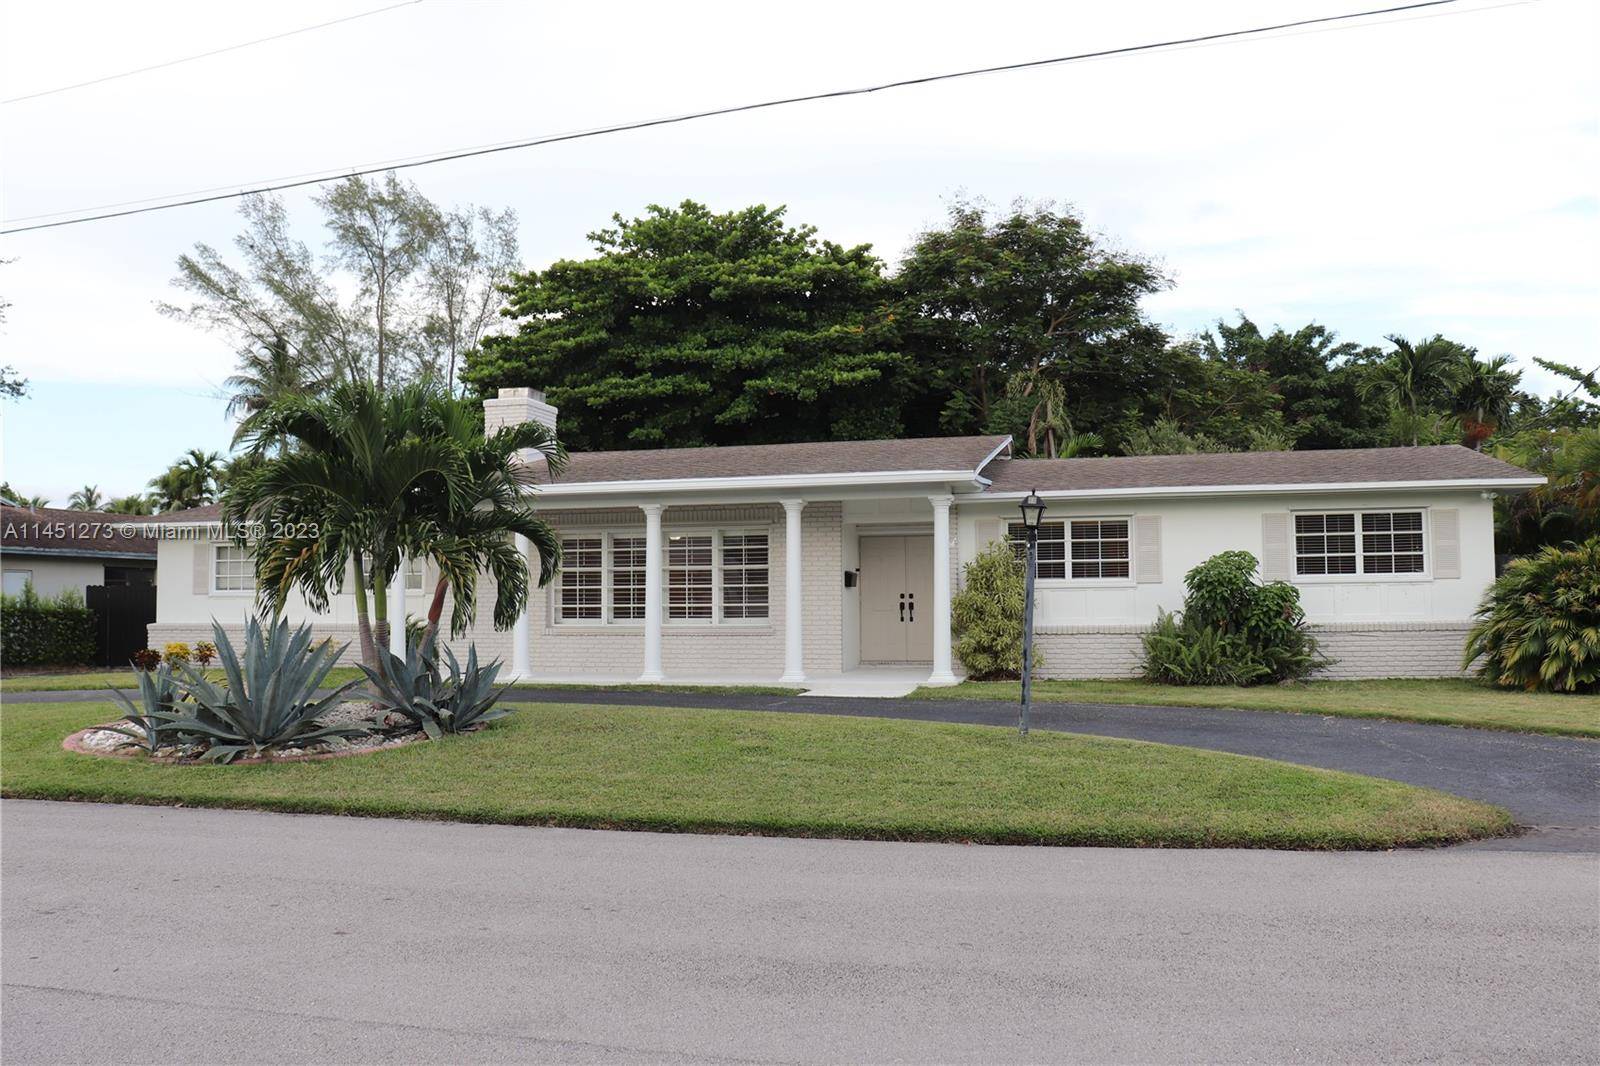 Bright spacious 4 bedroom, 2 bathroom house centrally located in the heart of South Miami.